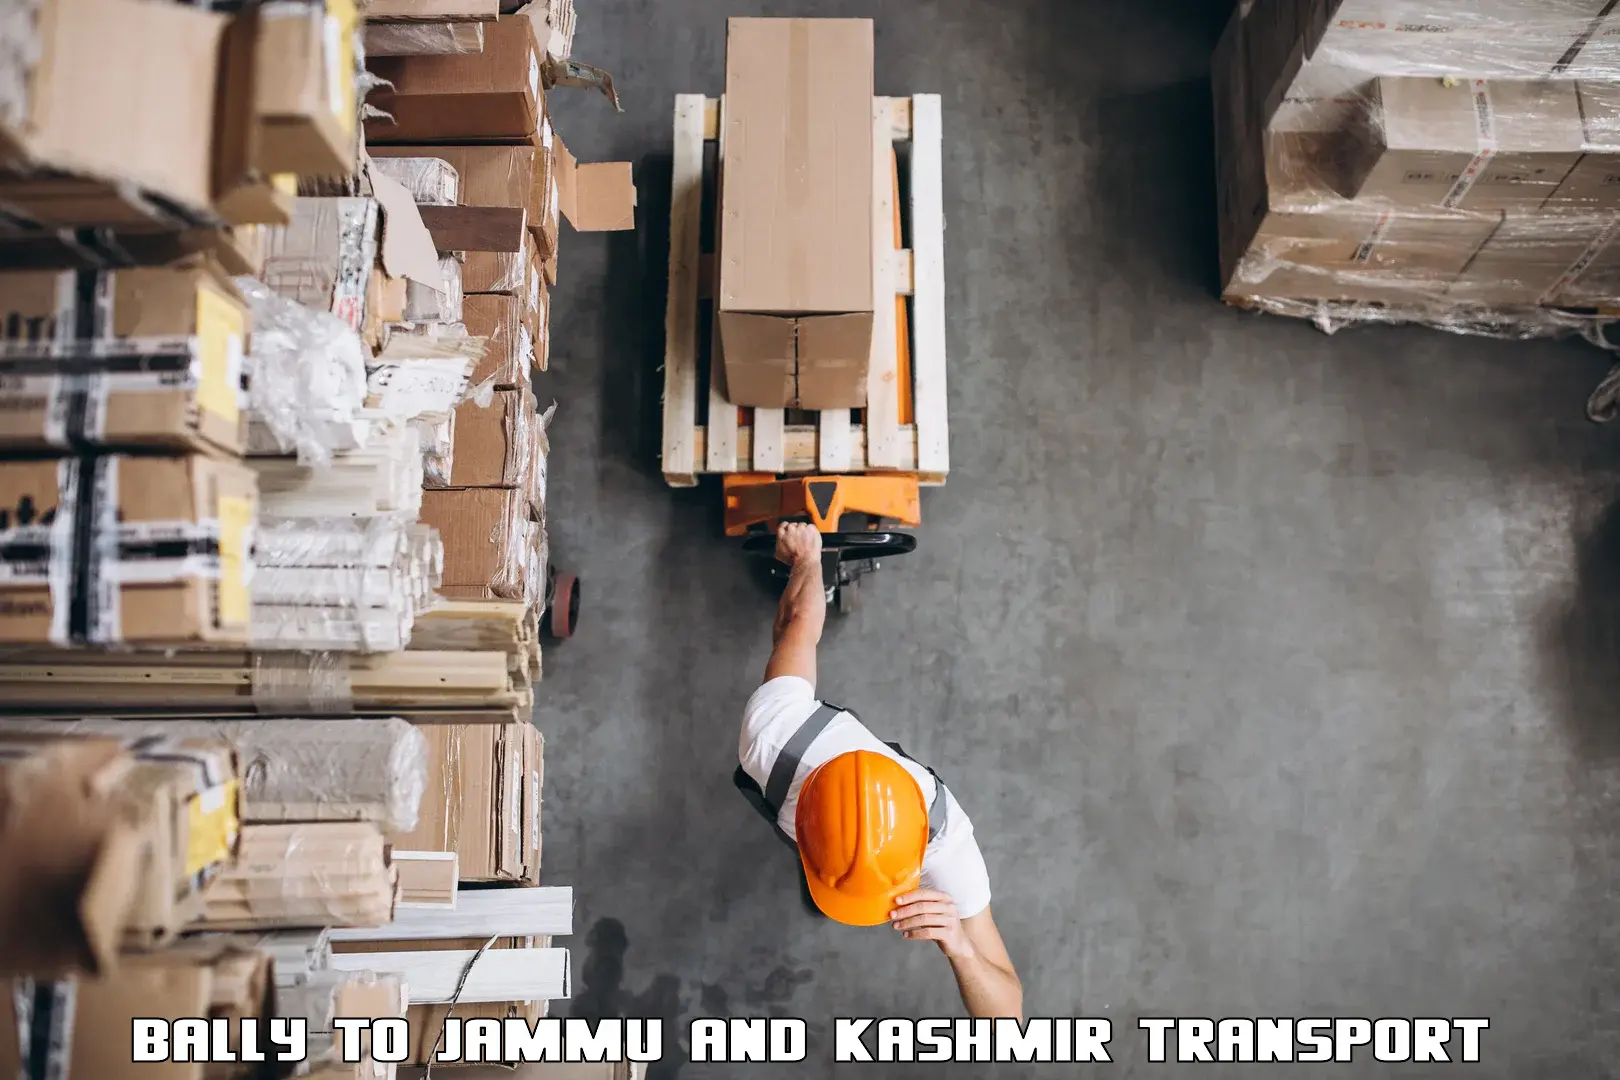 Vehicle transport services in Bally to Baramulla